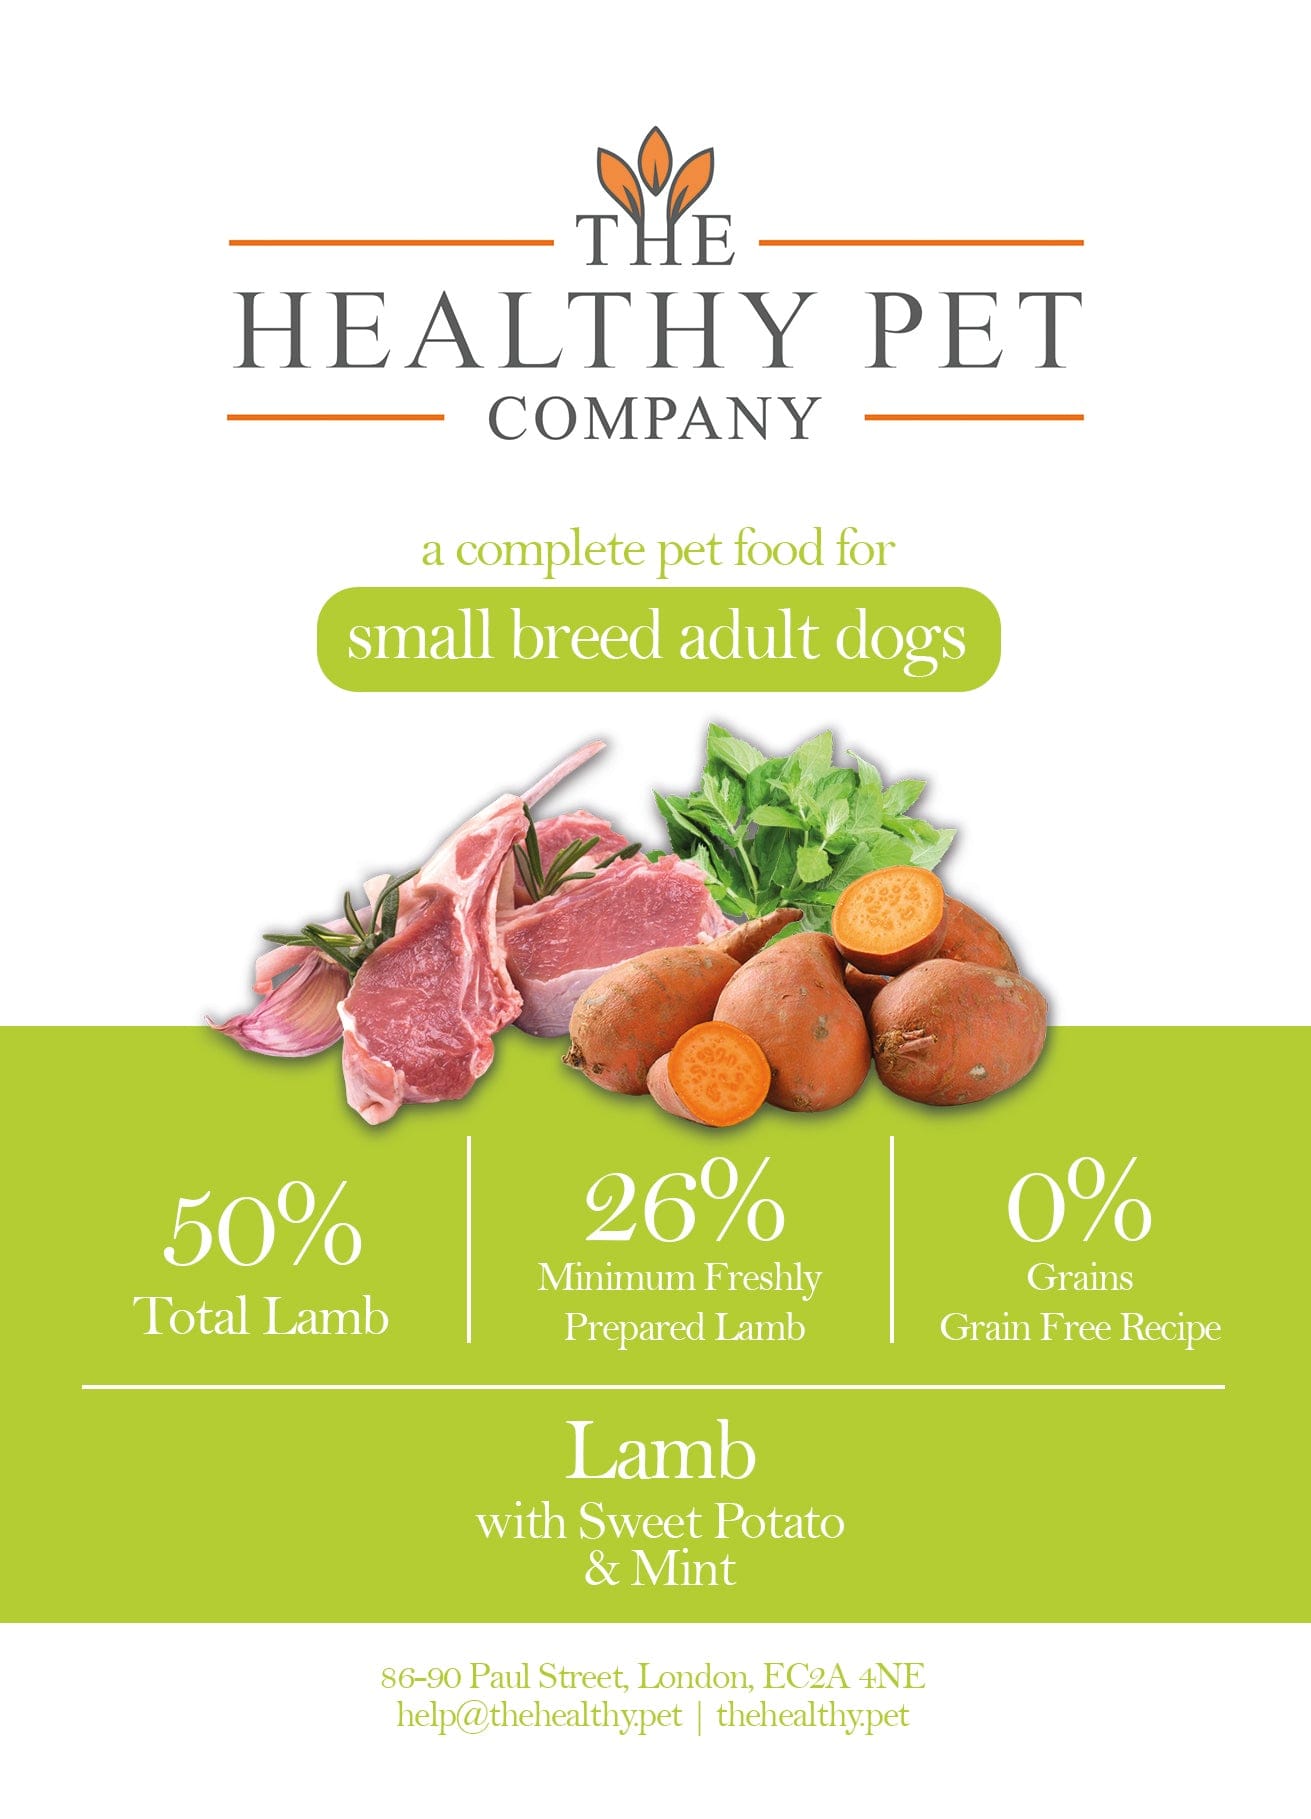 The Healthy Pet Company Complete Meal - Lamb with Sweet Potato for Adult Dogs - The Healthy Pet Company